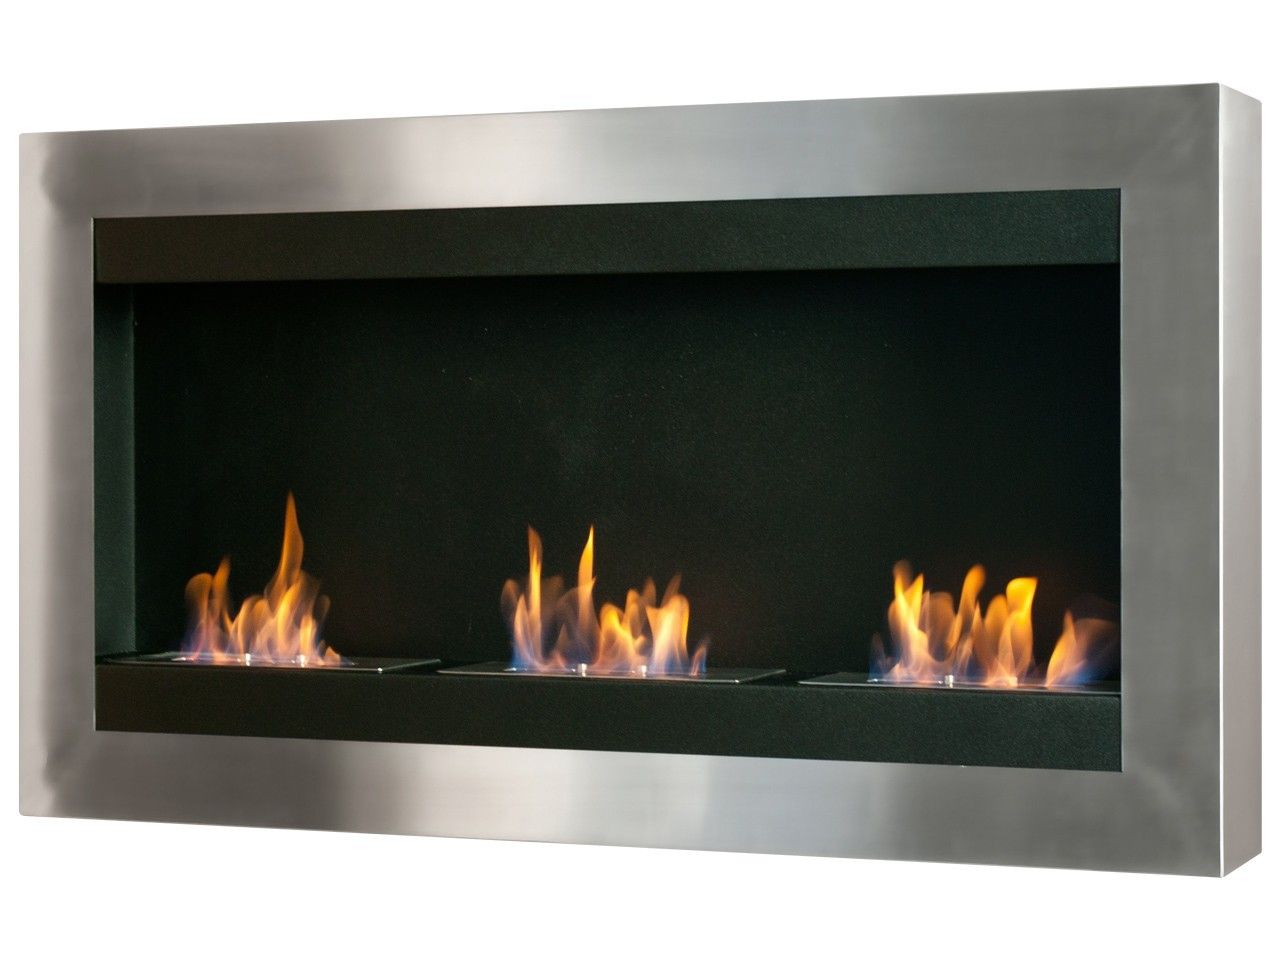 Ignis Fireplace New Recessed Ventless Ethanol Fireplace Optimum by Ignis